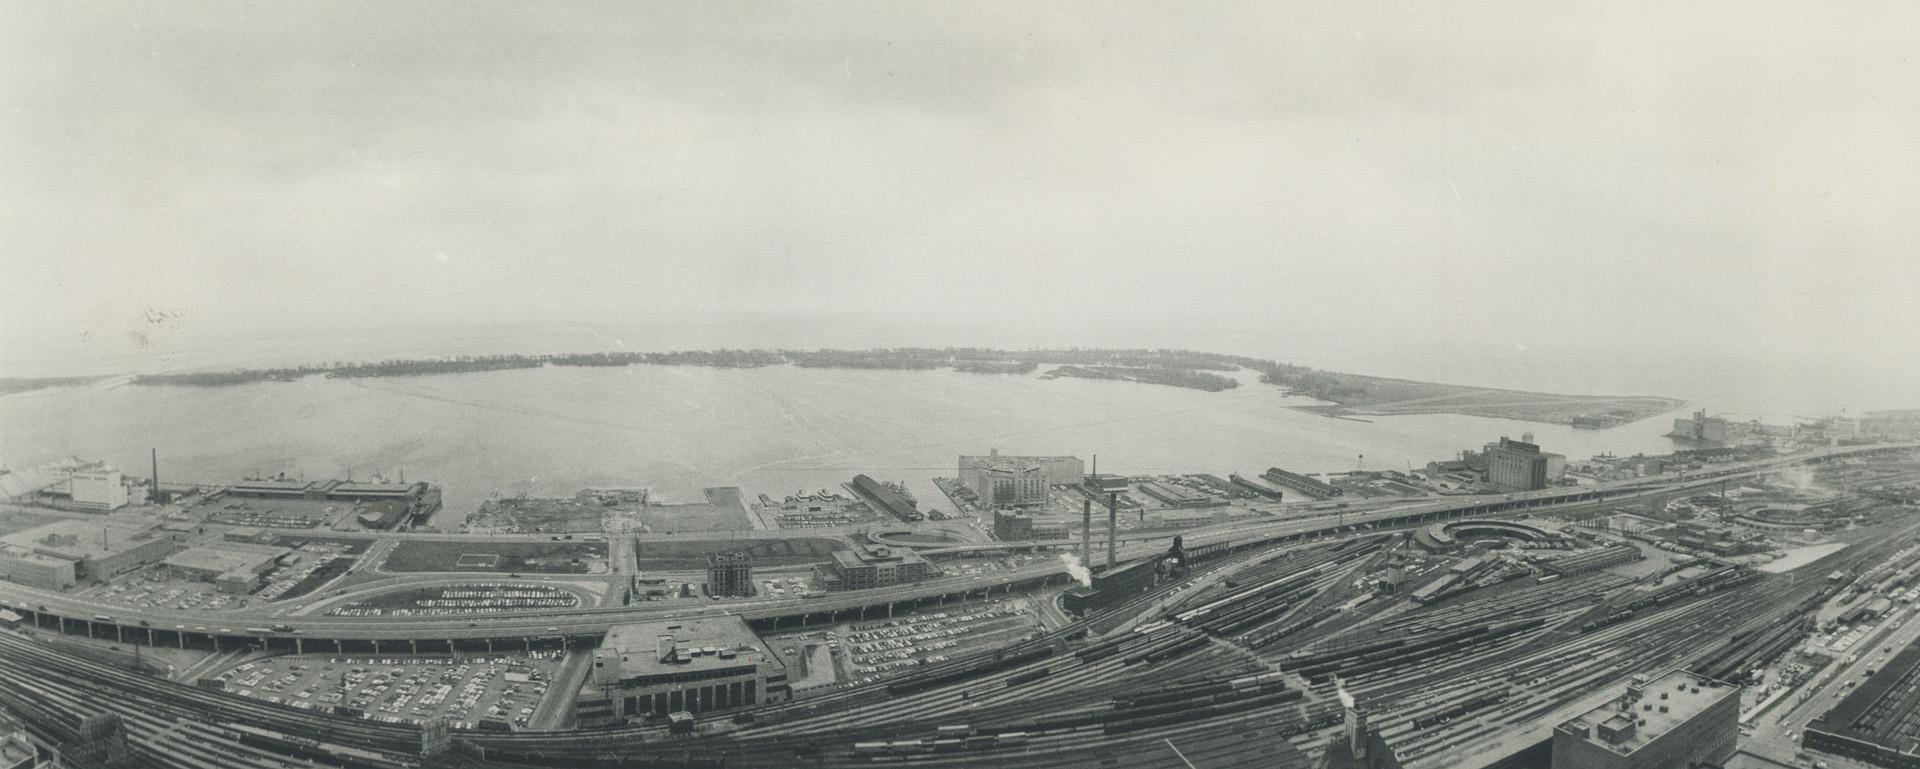 Image shows an aerial view of the Harbour and the lake.